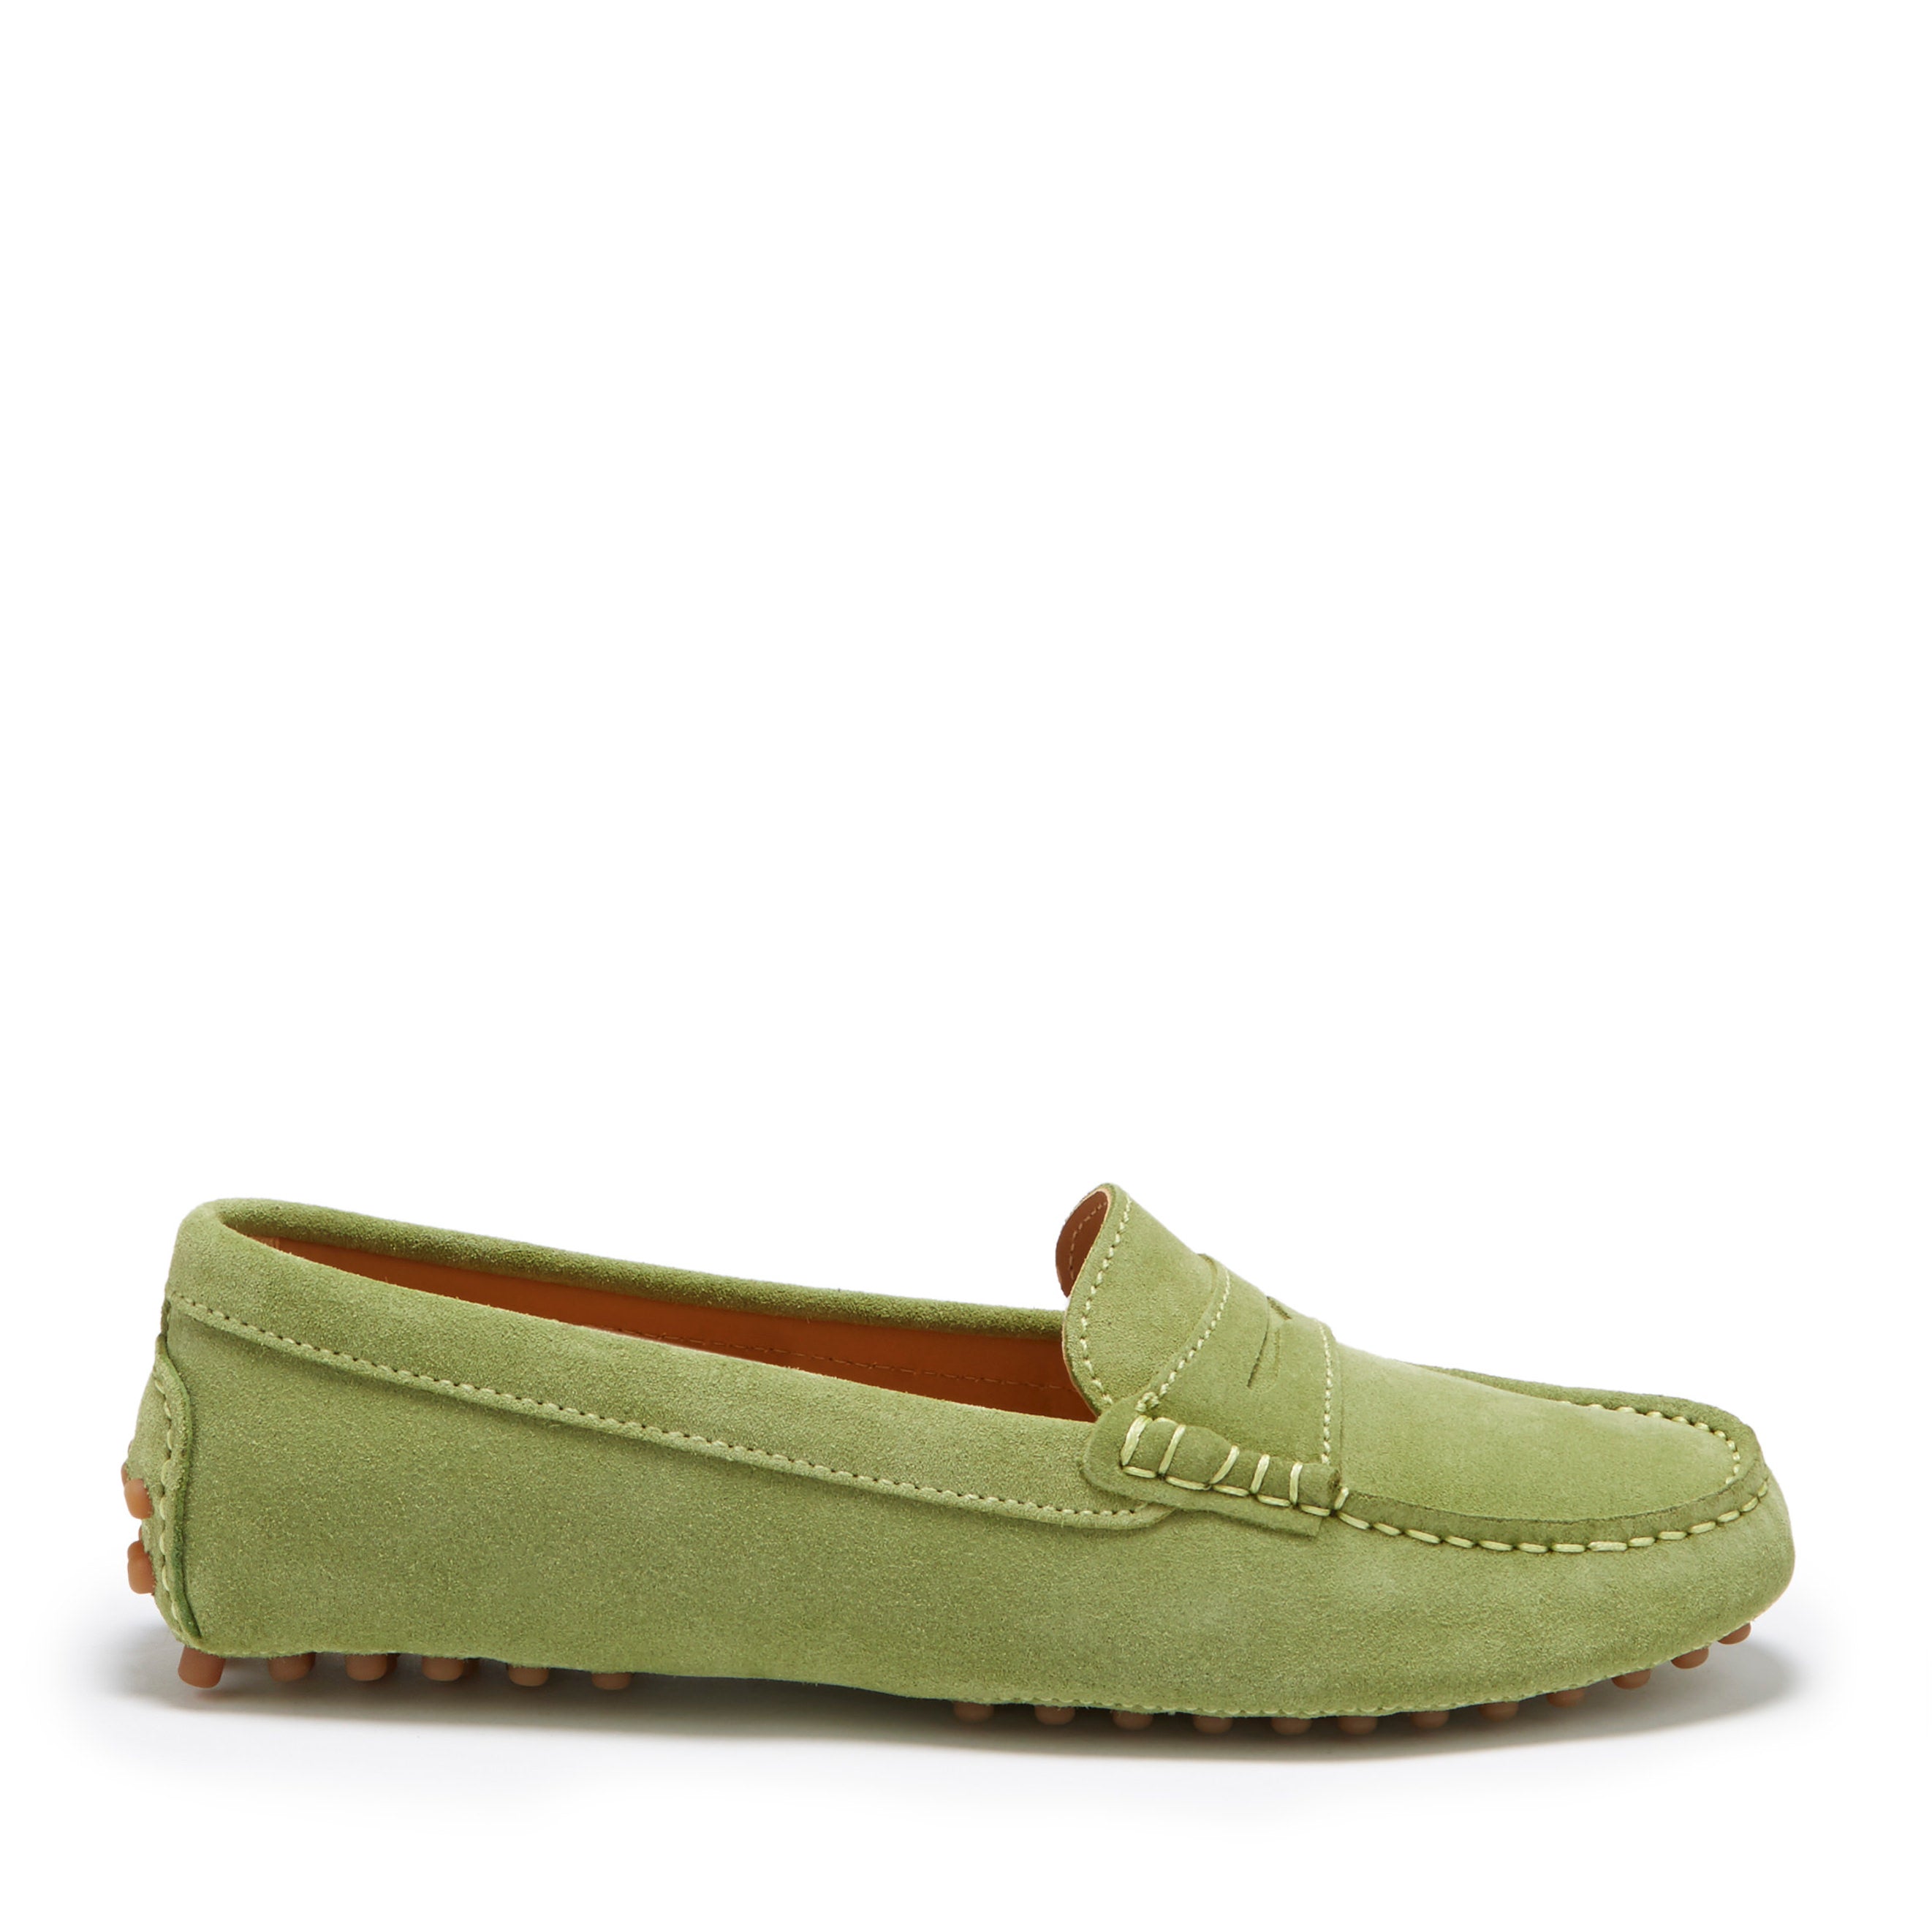 Women's Penny Driving Loafers, olive green - Hugs & Co.